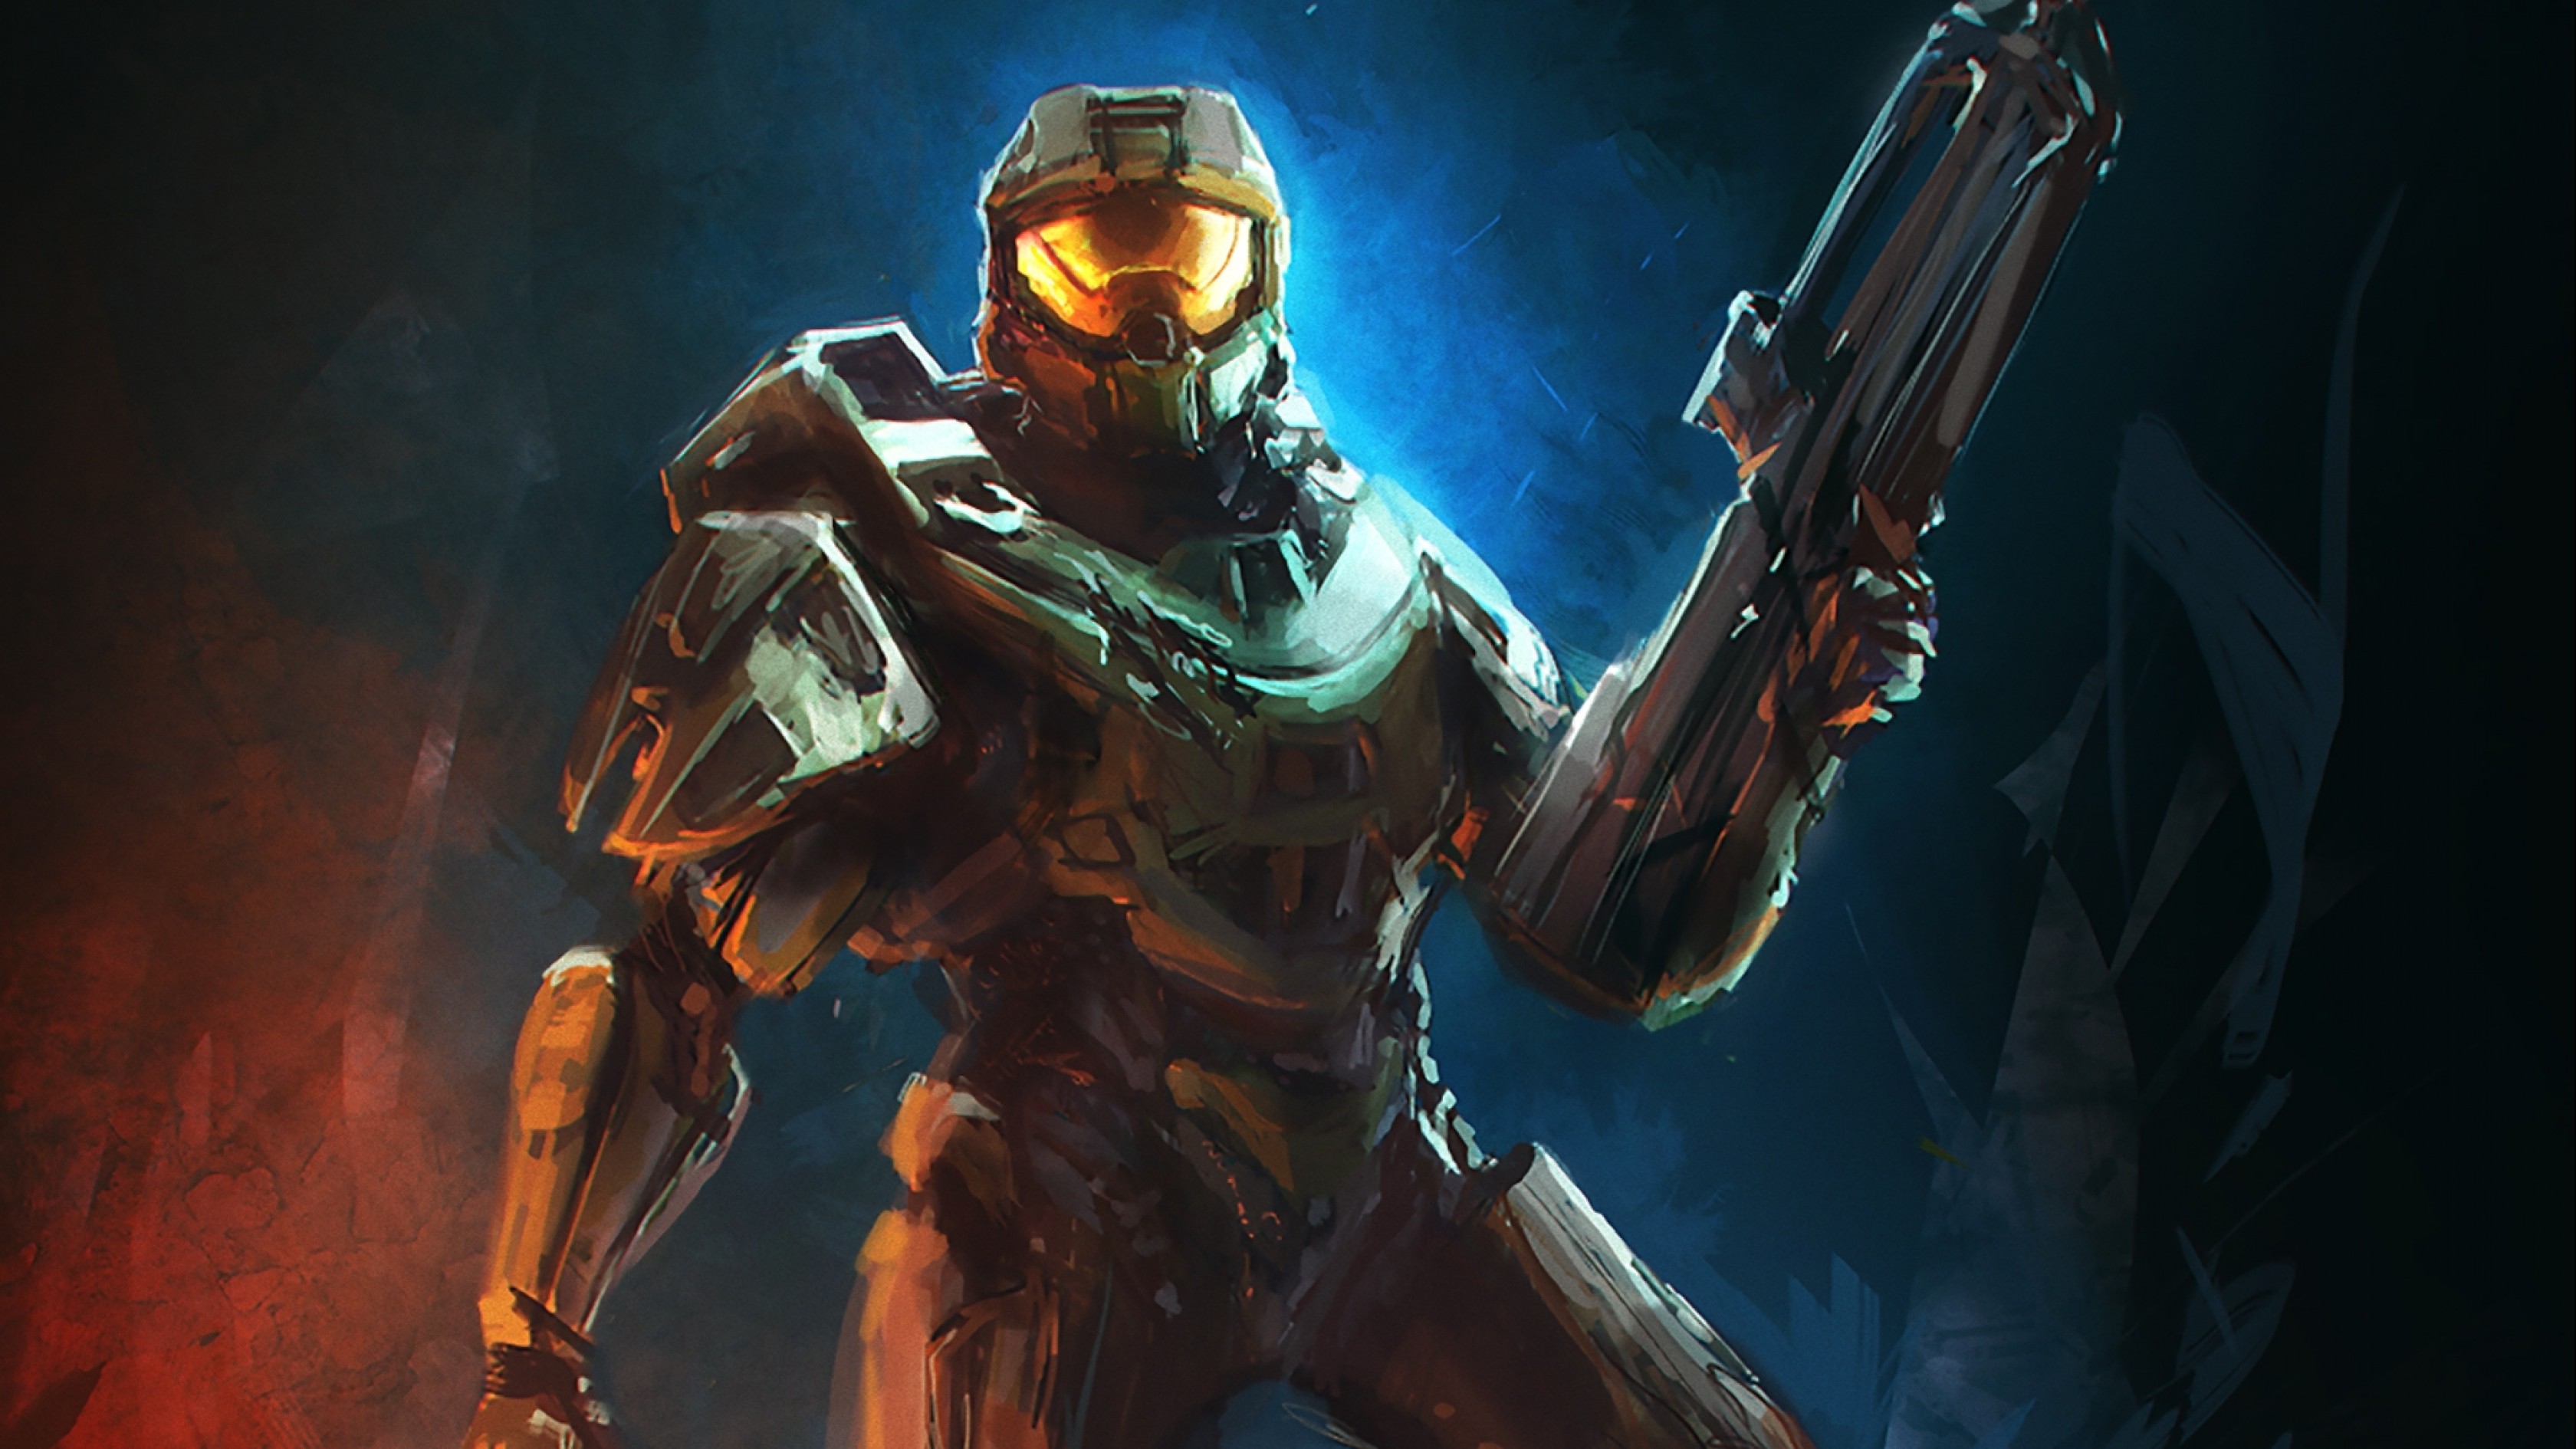 Halo Master Chief Halo 4 Xbox One Video Games Halo Master Chief Collection Artwork 3360x1890